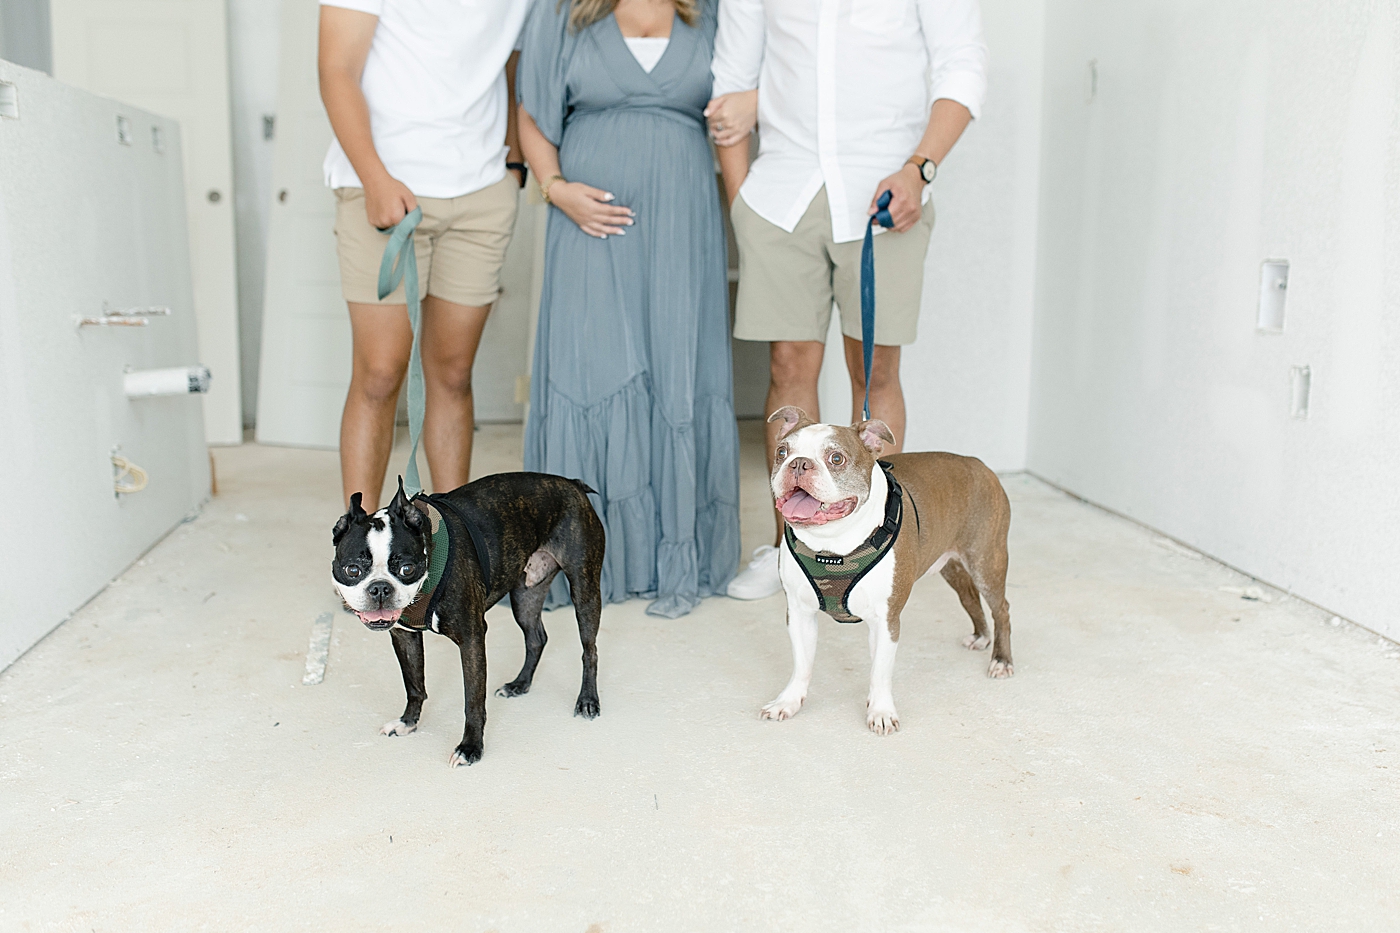 Family photo with dogs | Photo by Little Sunshine Photography